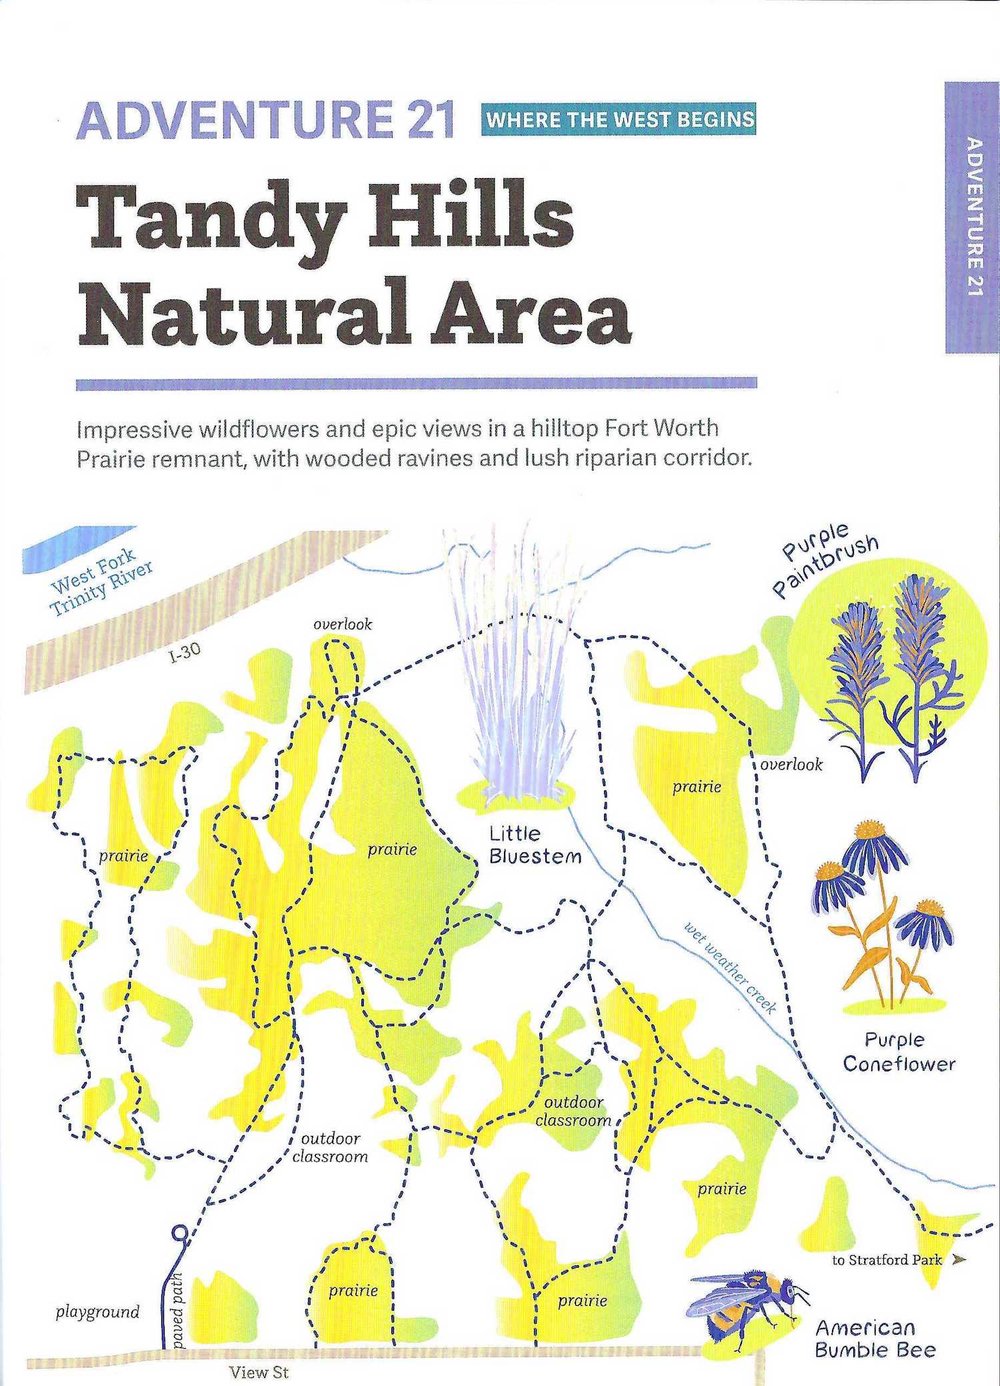  The first of 6 pages about Tandy Hills. 